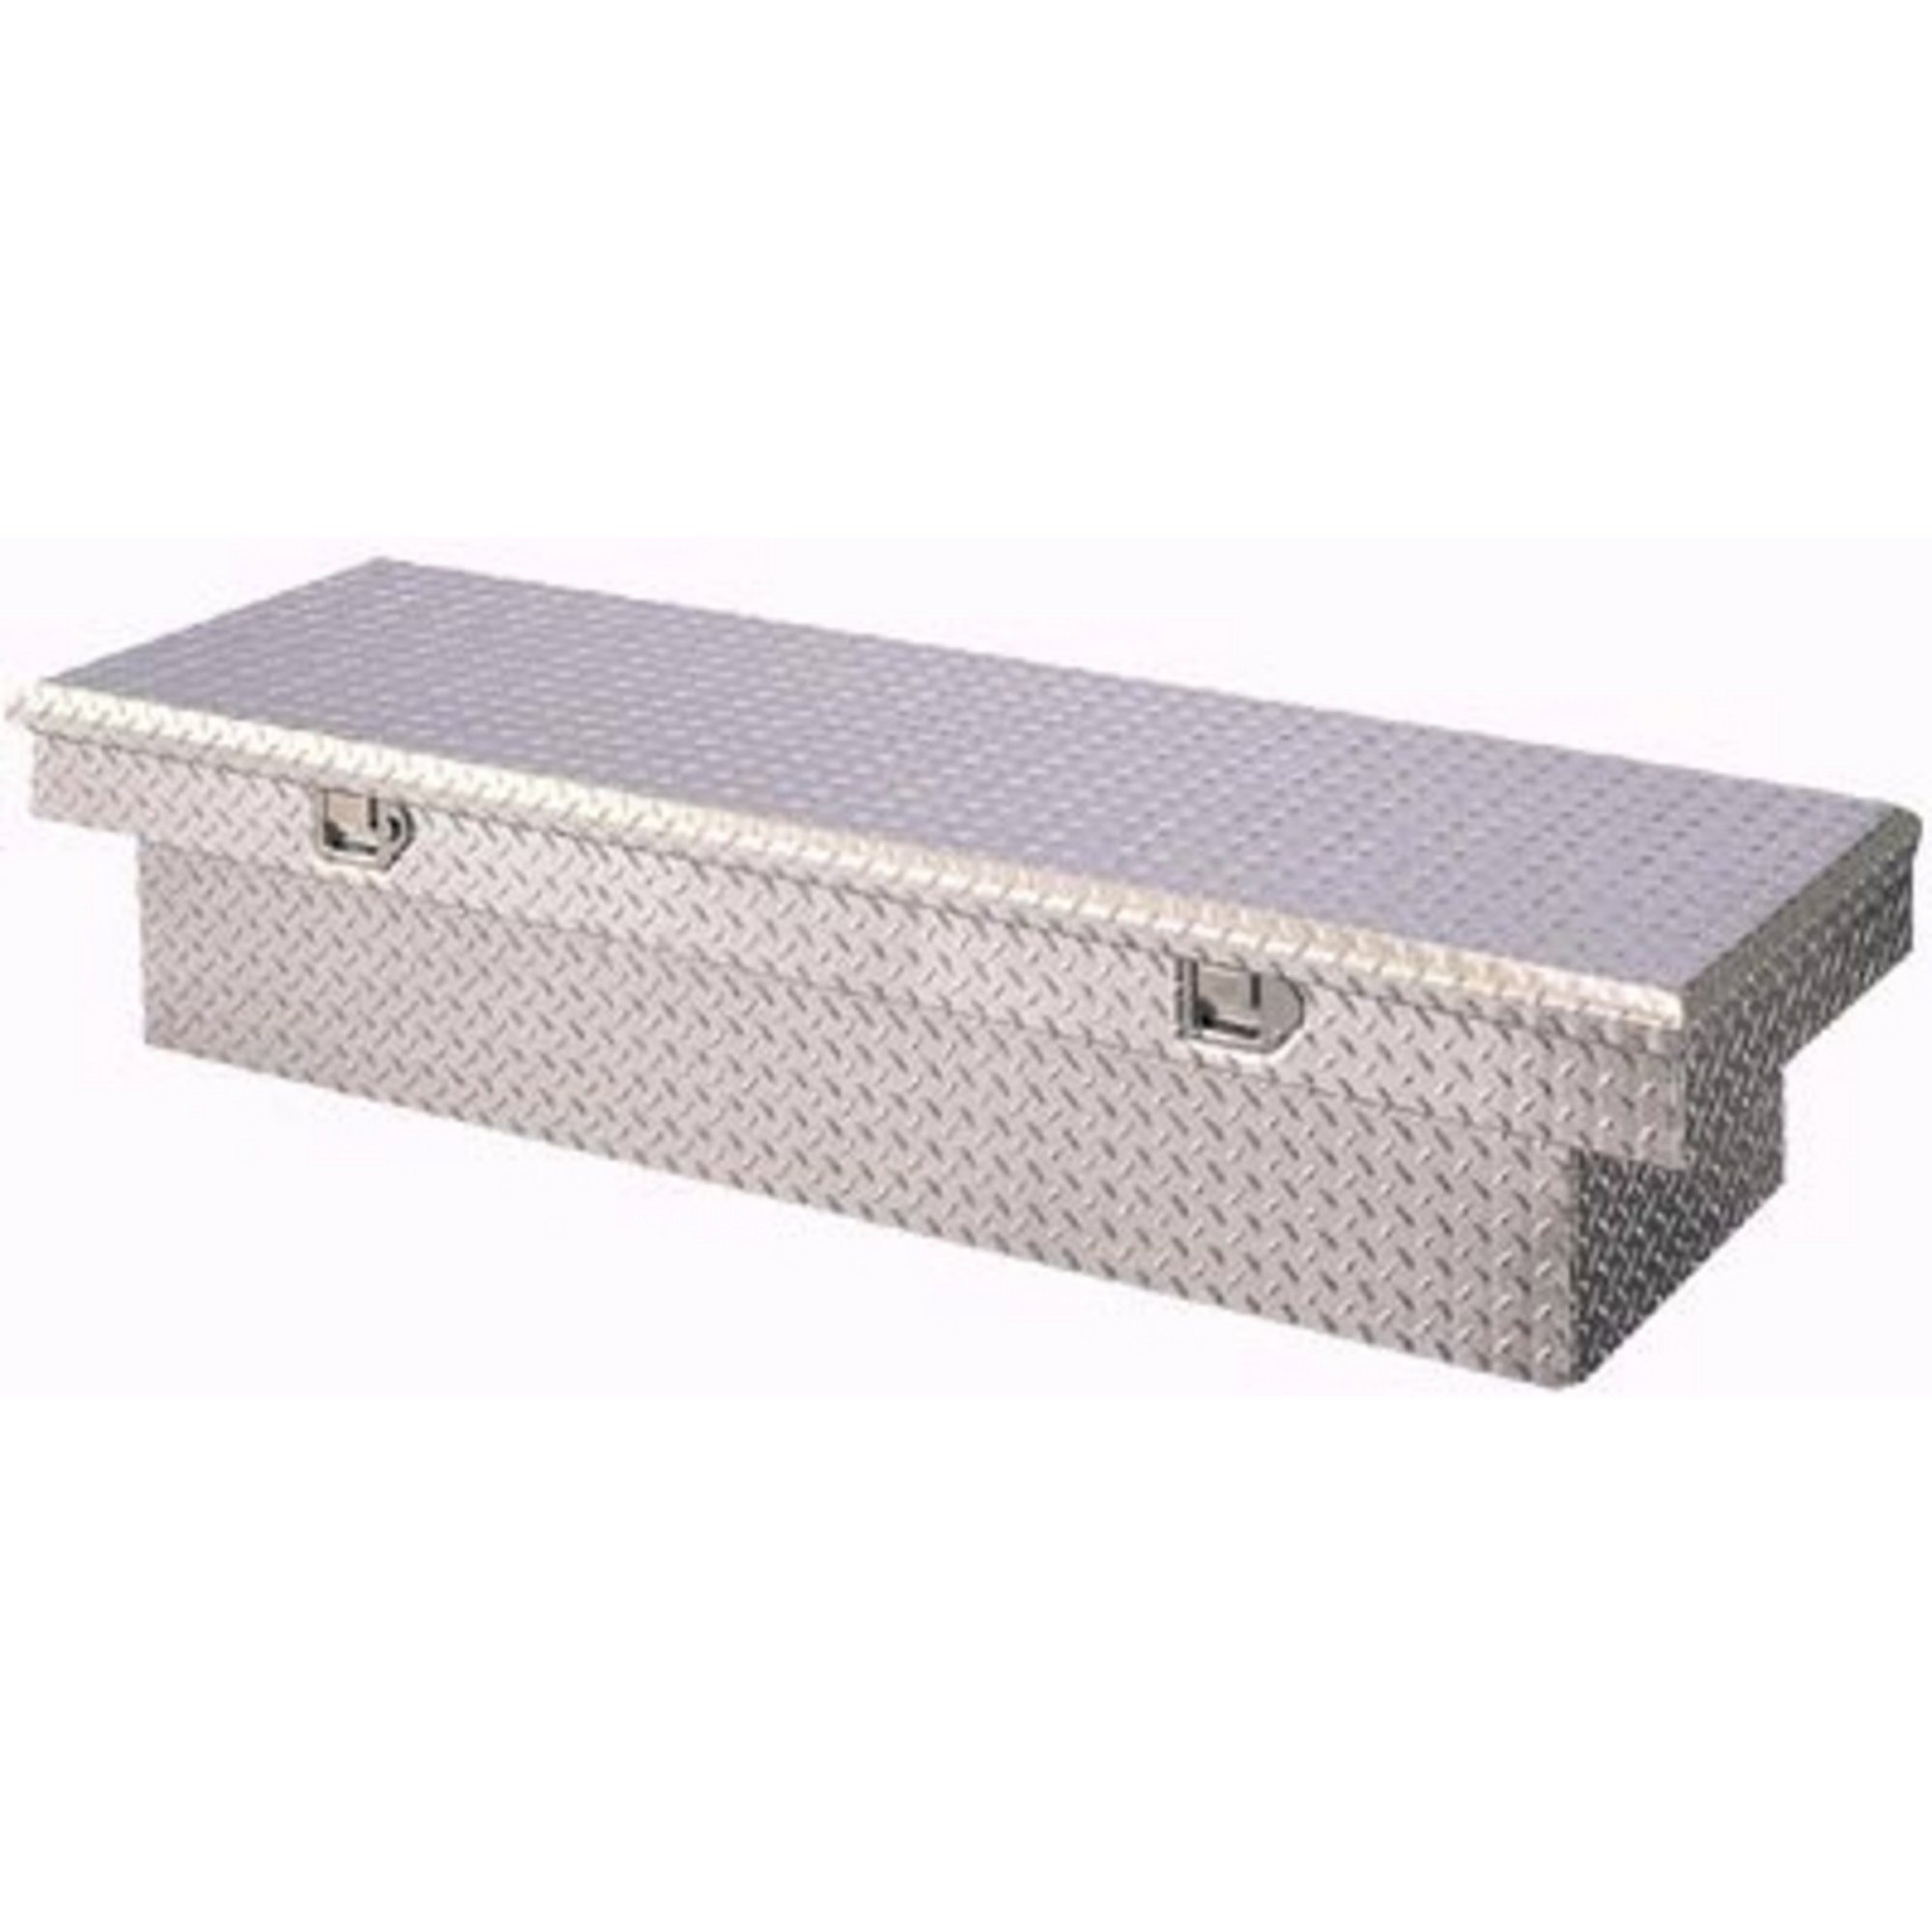 Crossbed Box by Snap-On | Northern Tool